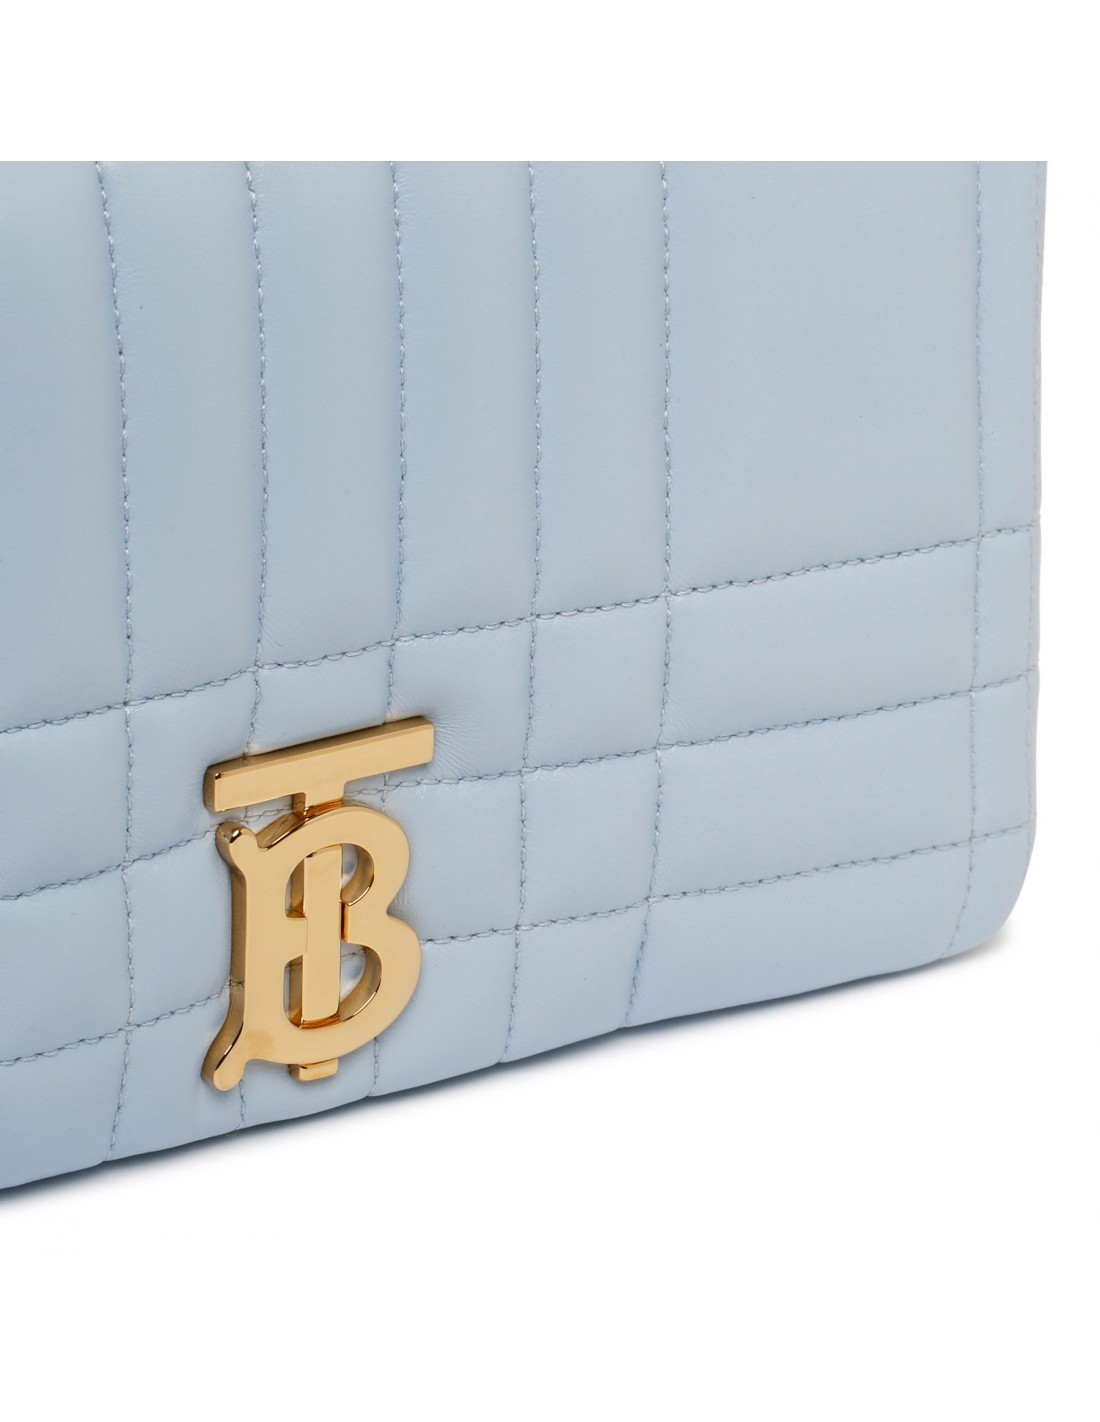 Lola pale blue quilted leather small bag